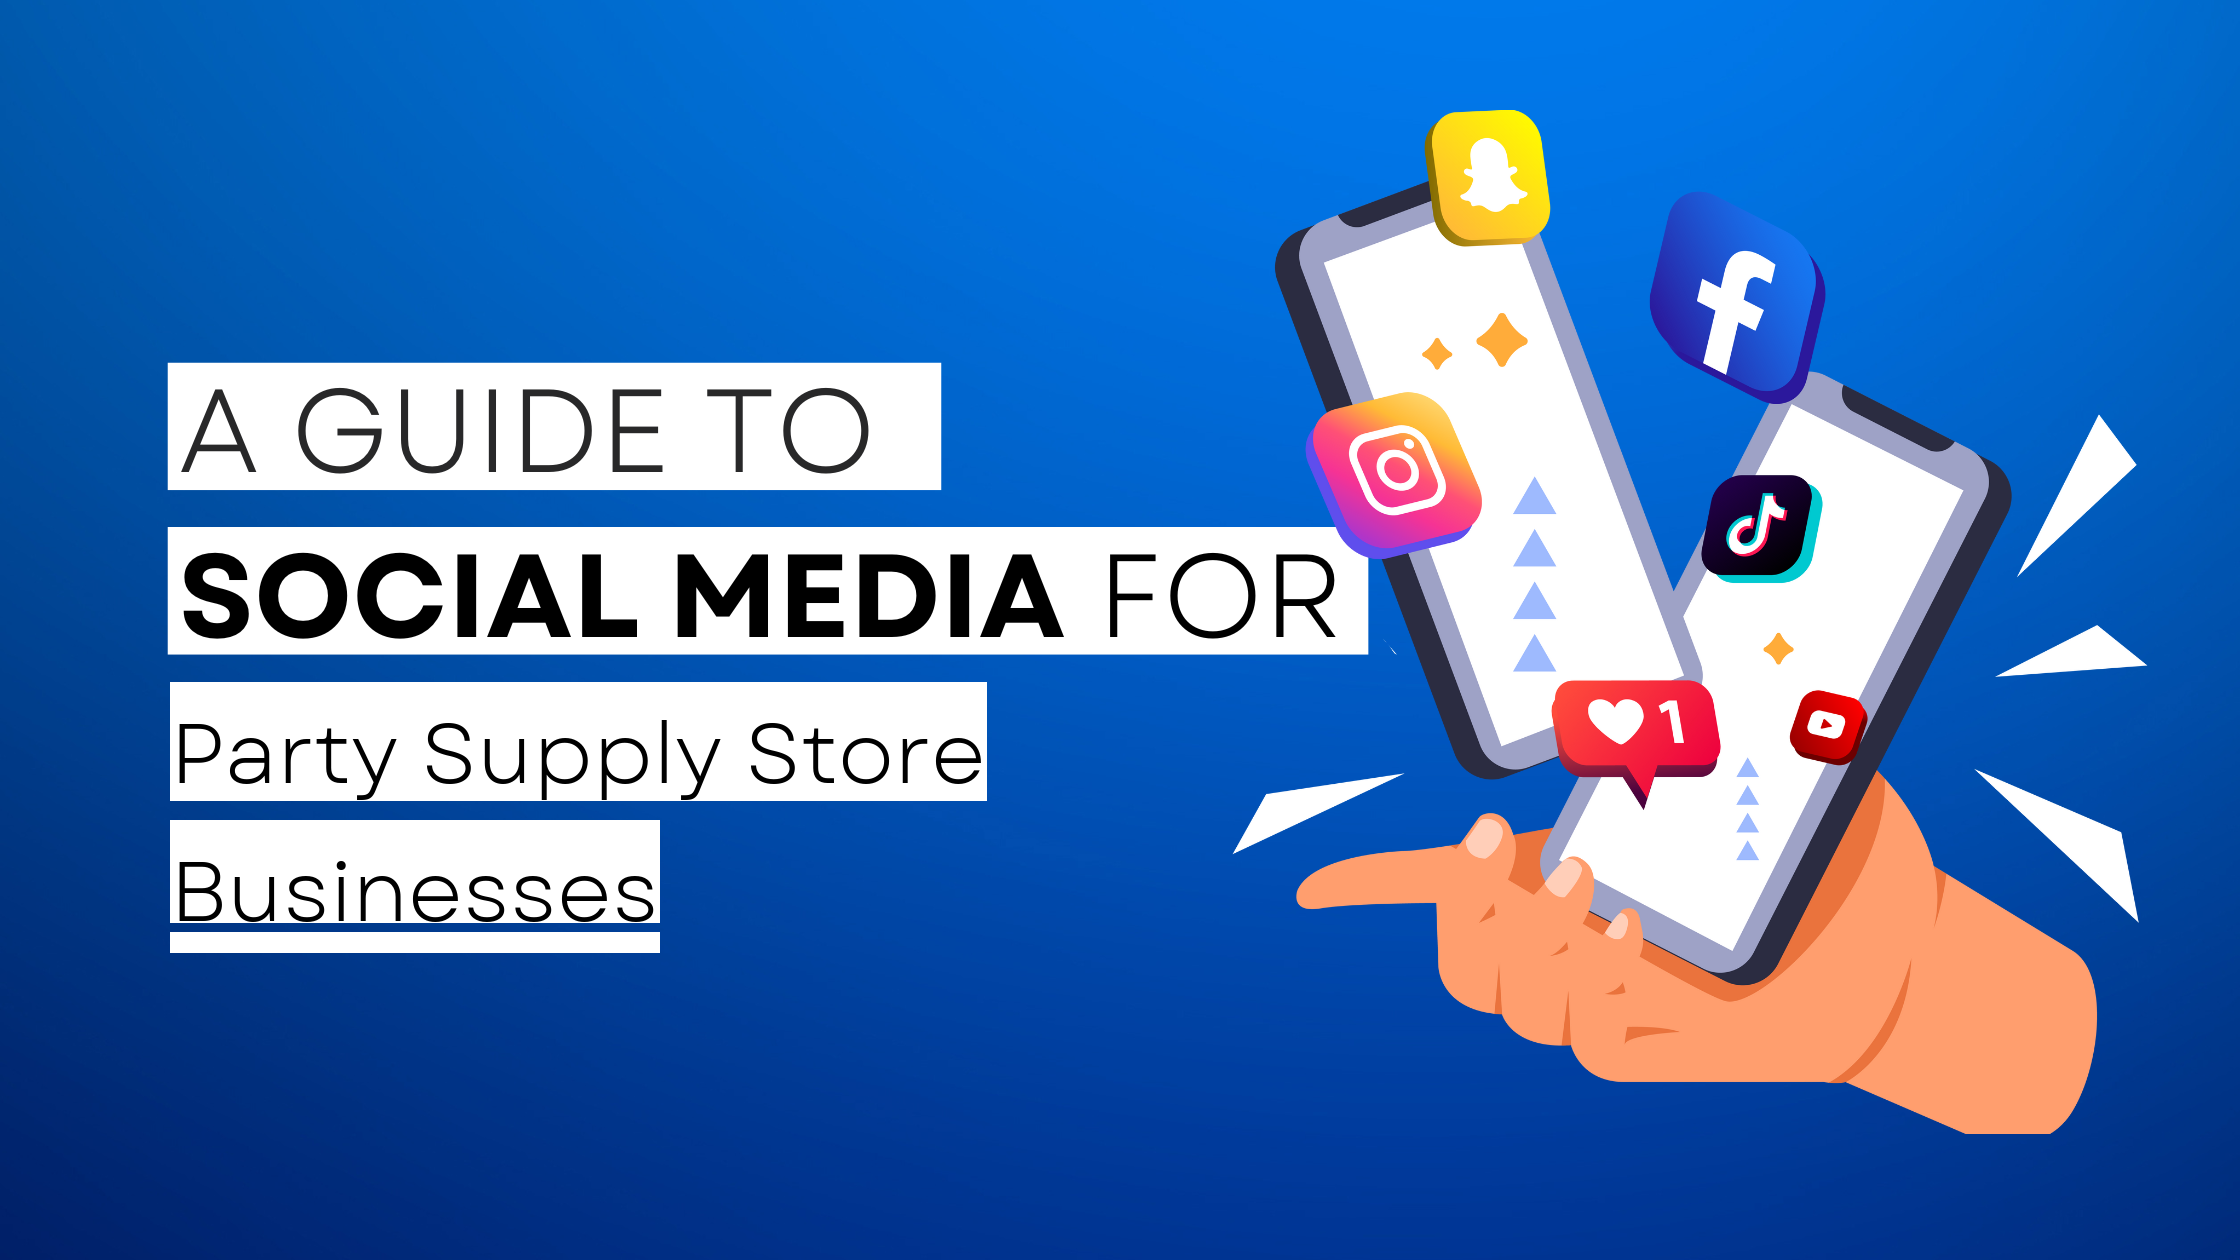 How to start Party Supply Store  on social media